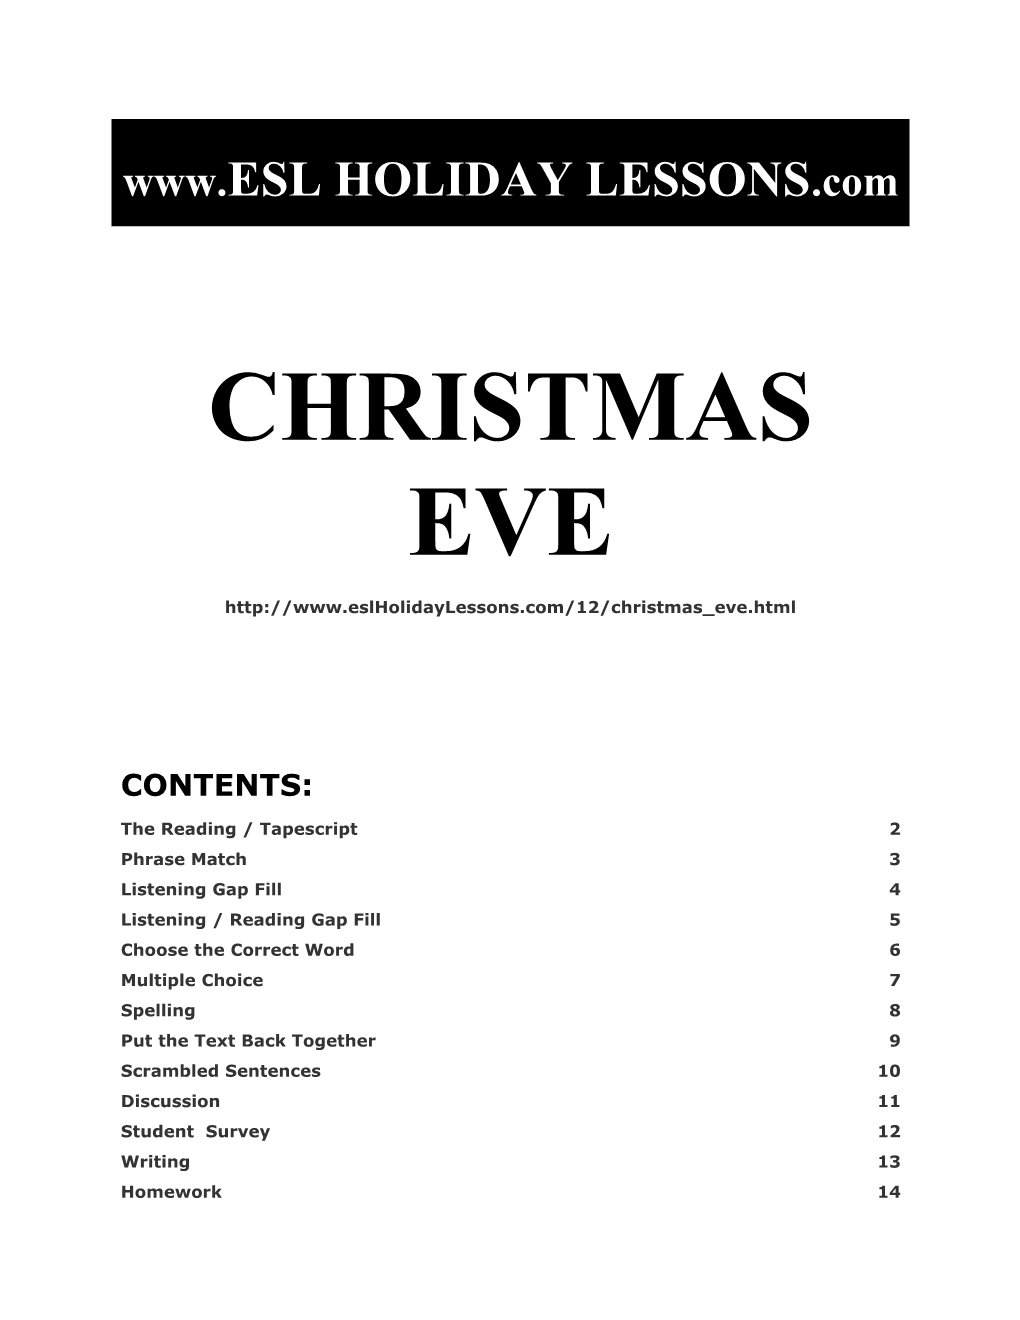 Holiday Lessons - Christmas Eve